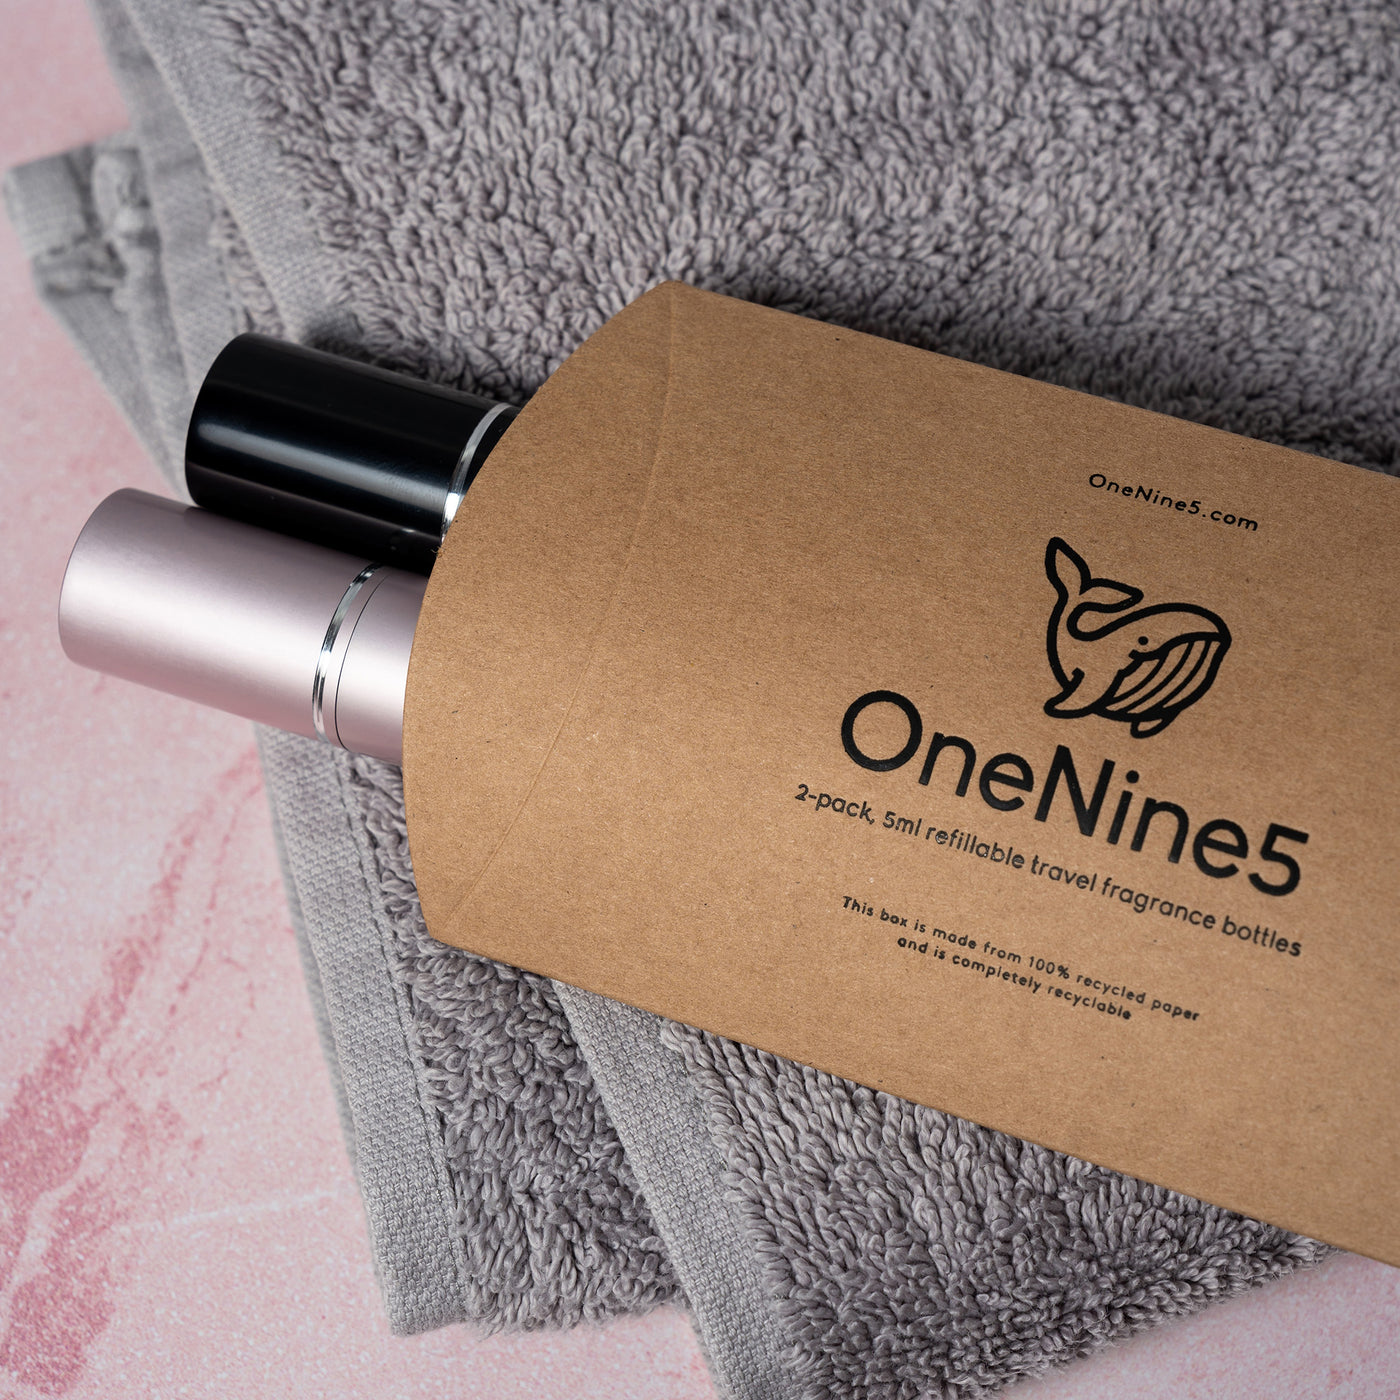 A pink and black OneNine5 fragrance bottle, poking out of the natural kraft paper packaging, resting on a towel in the bathroom